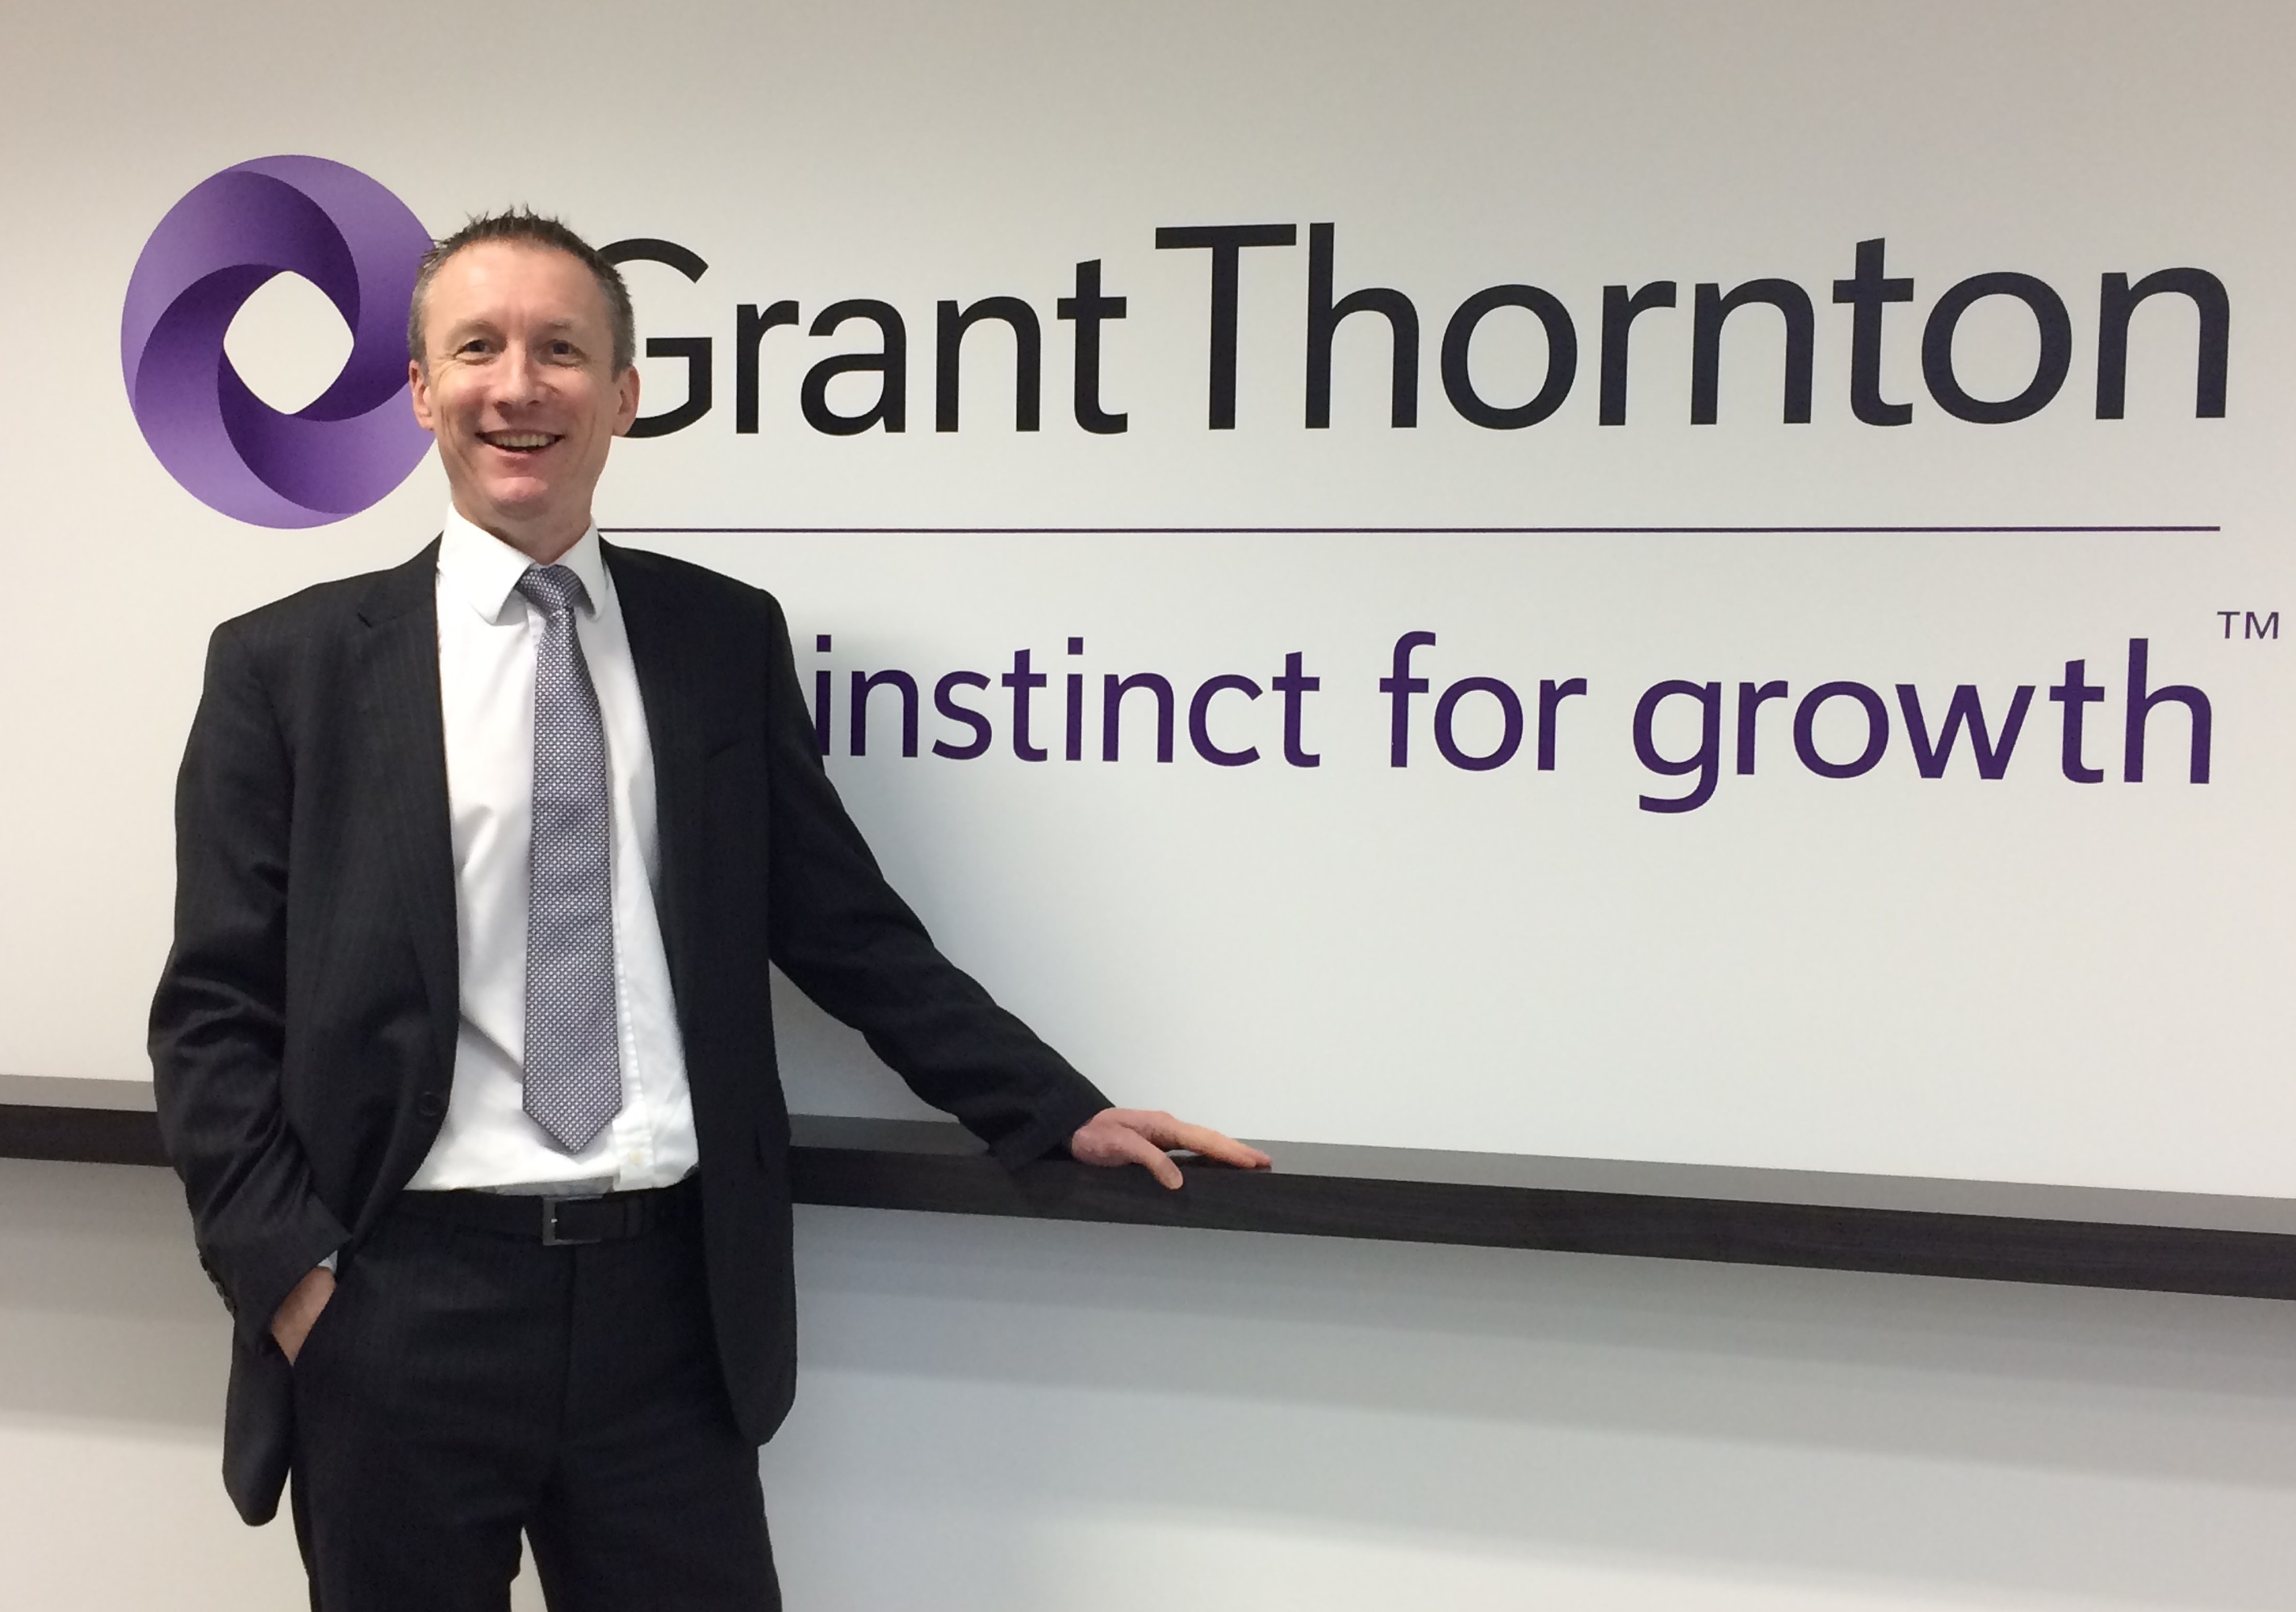 Senior appointment at Grant Thornton adds new dimension to MK team